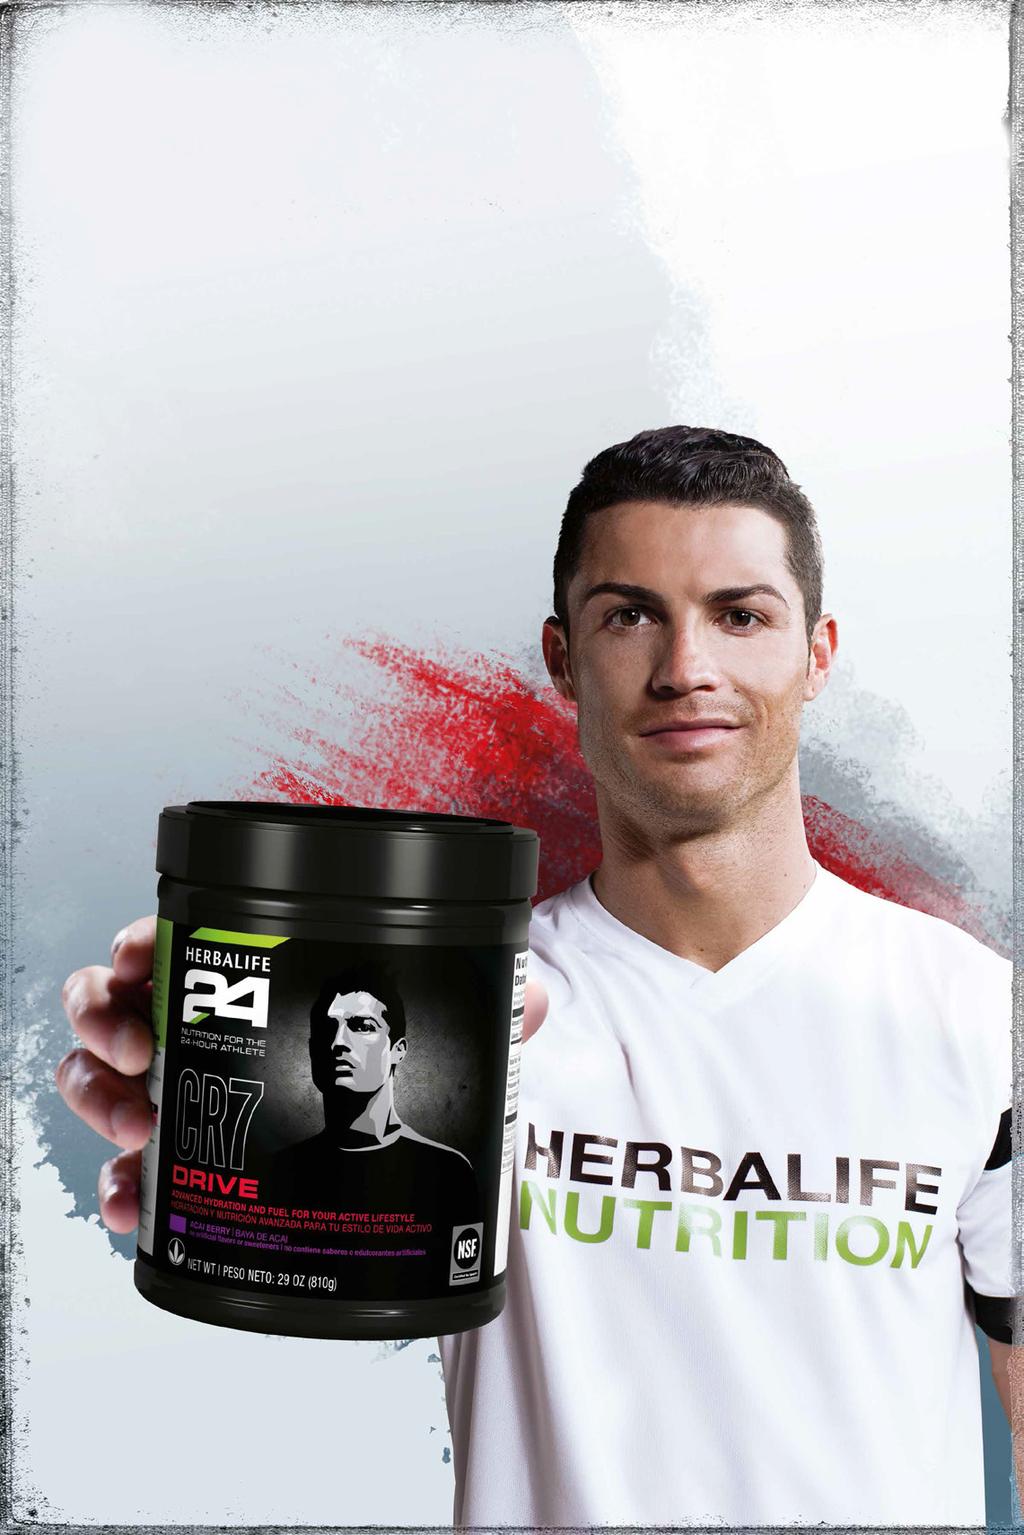 INTRODUCING CR7 DRIVE NO ARTIFICIAL FLAVORS OR SWEETENERS BIOAVAILABLE ELECTROLYTES CARBOHYDRATES FOR ENERGY SUBTLE, REFRESHING FLAVOR Cristiano ronaldo